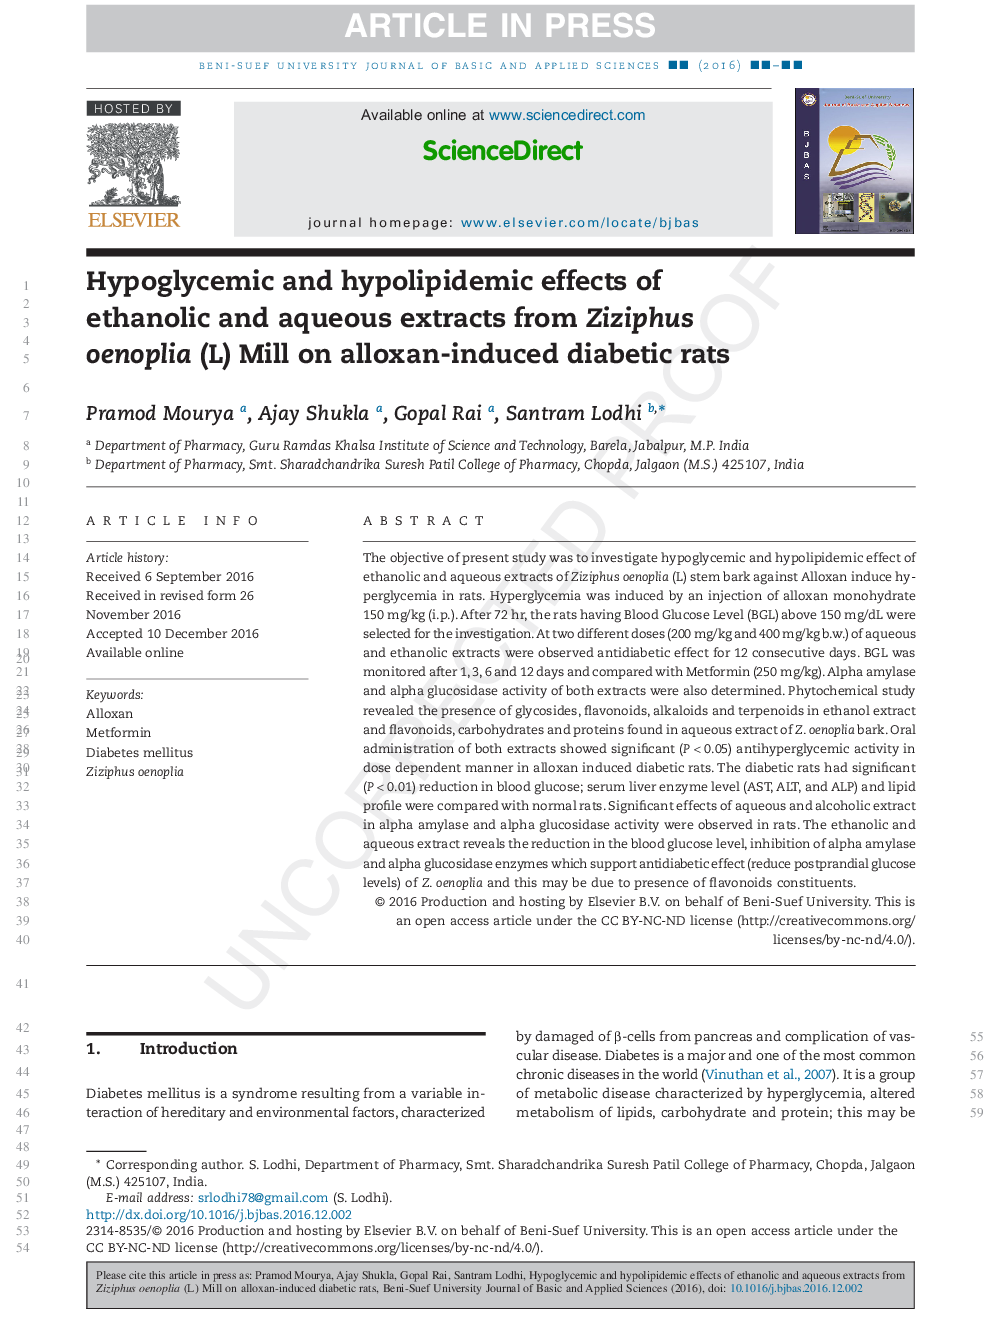 Hypoglycemic and hypolipidemic effects of ethanolic and aqueous extracts from Ziziphus oenoplia (L) Mill on alloxan-induced diabetic rats